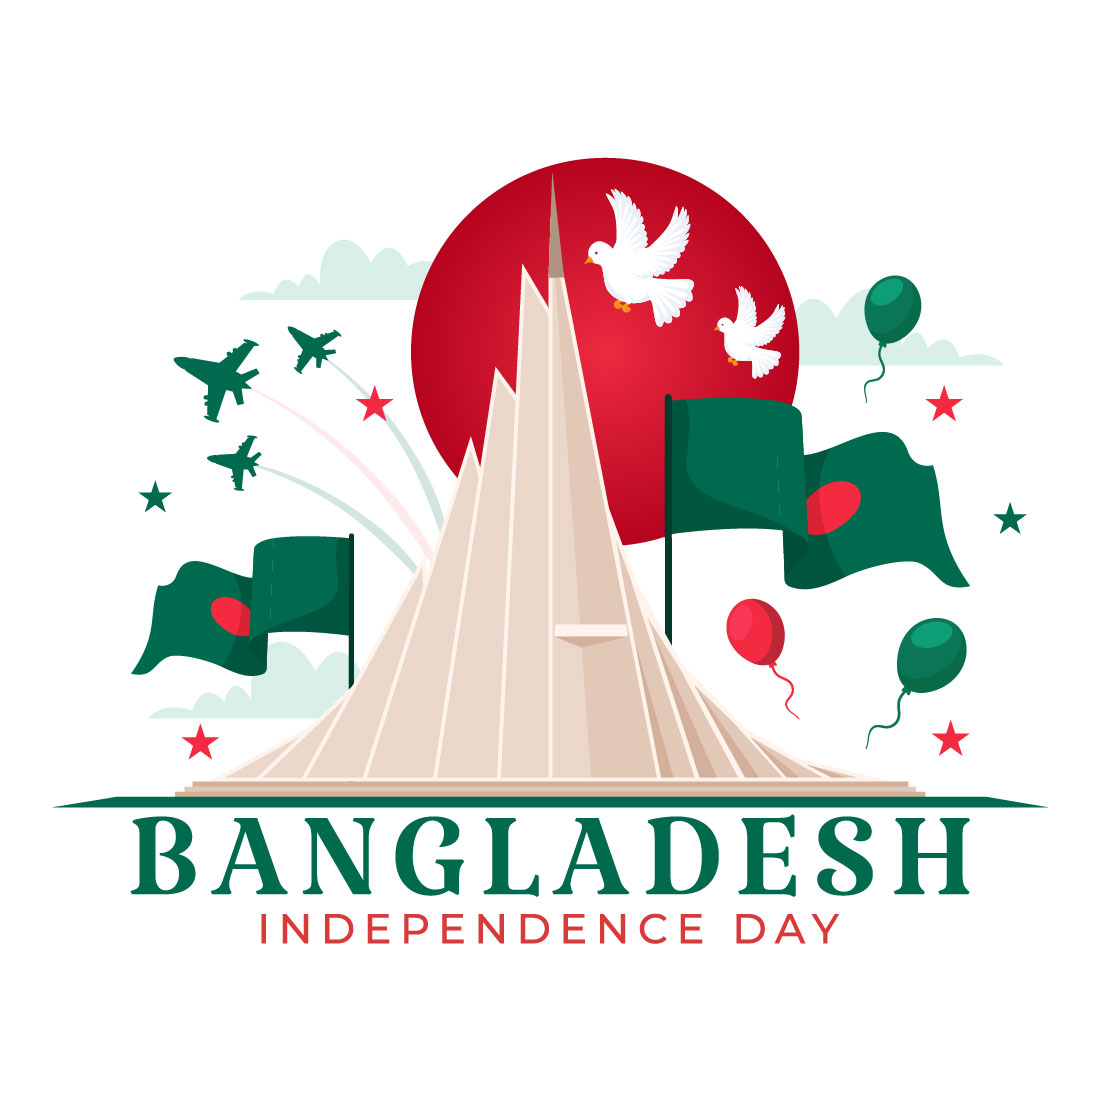 13 Bangladesh Independence Day Illustration preview image.